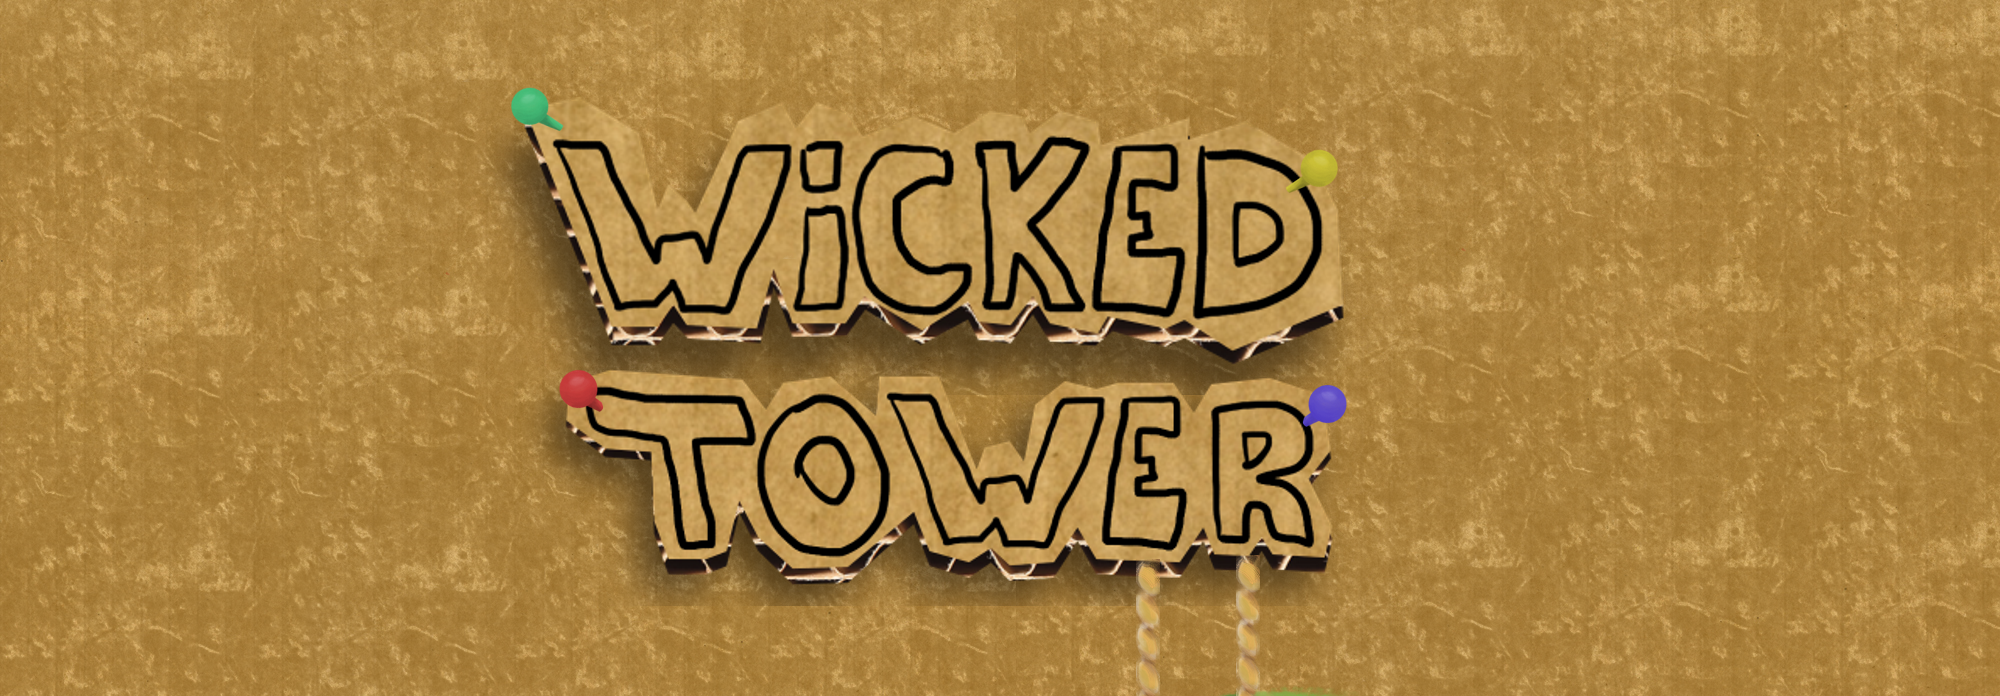 Wicked Tower